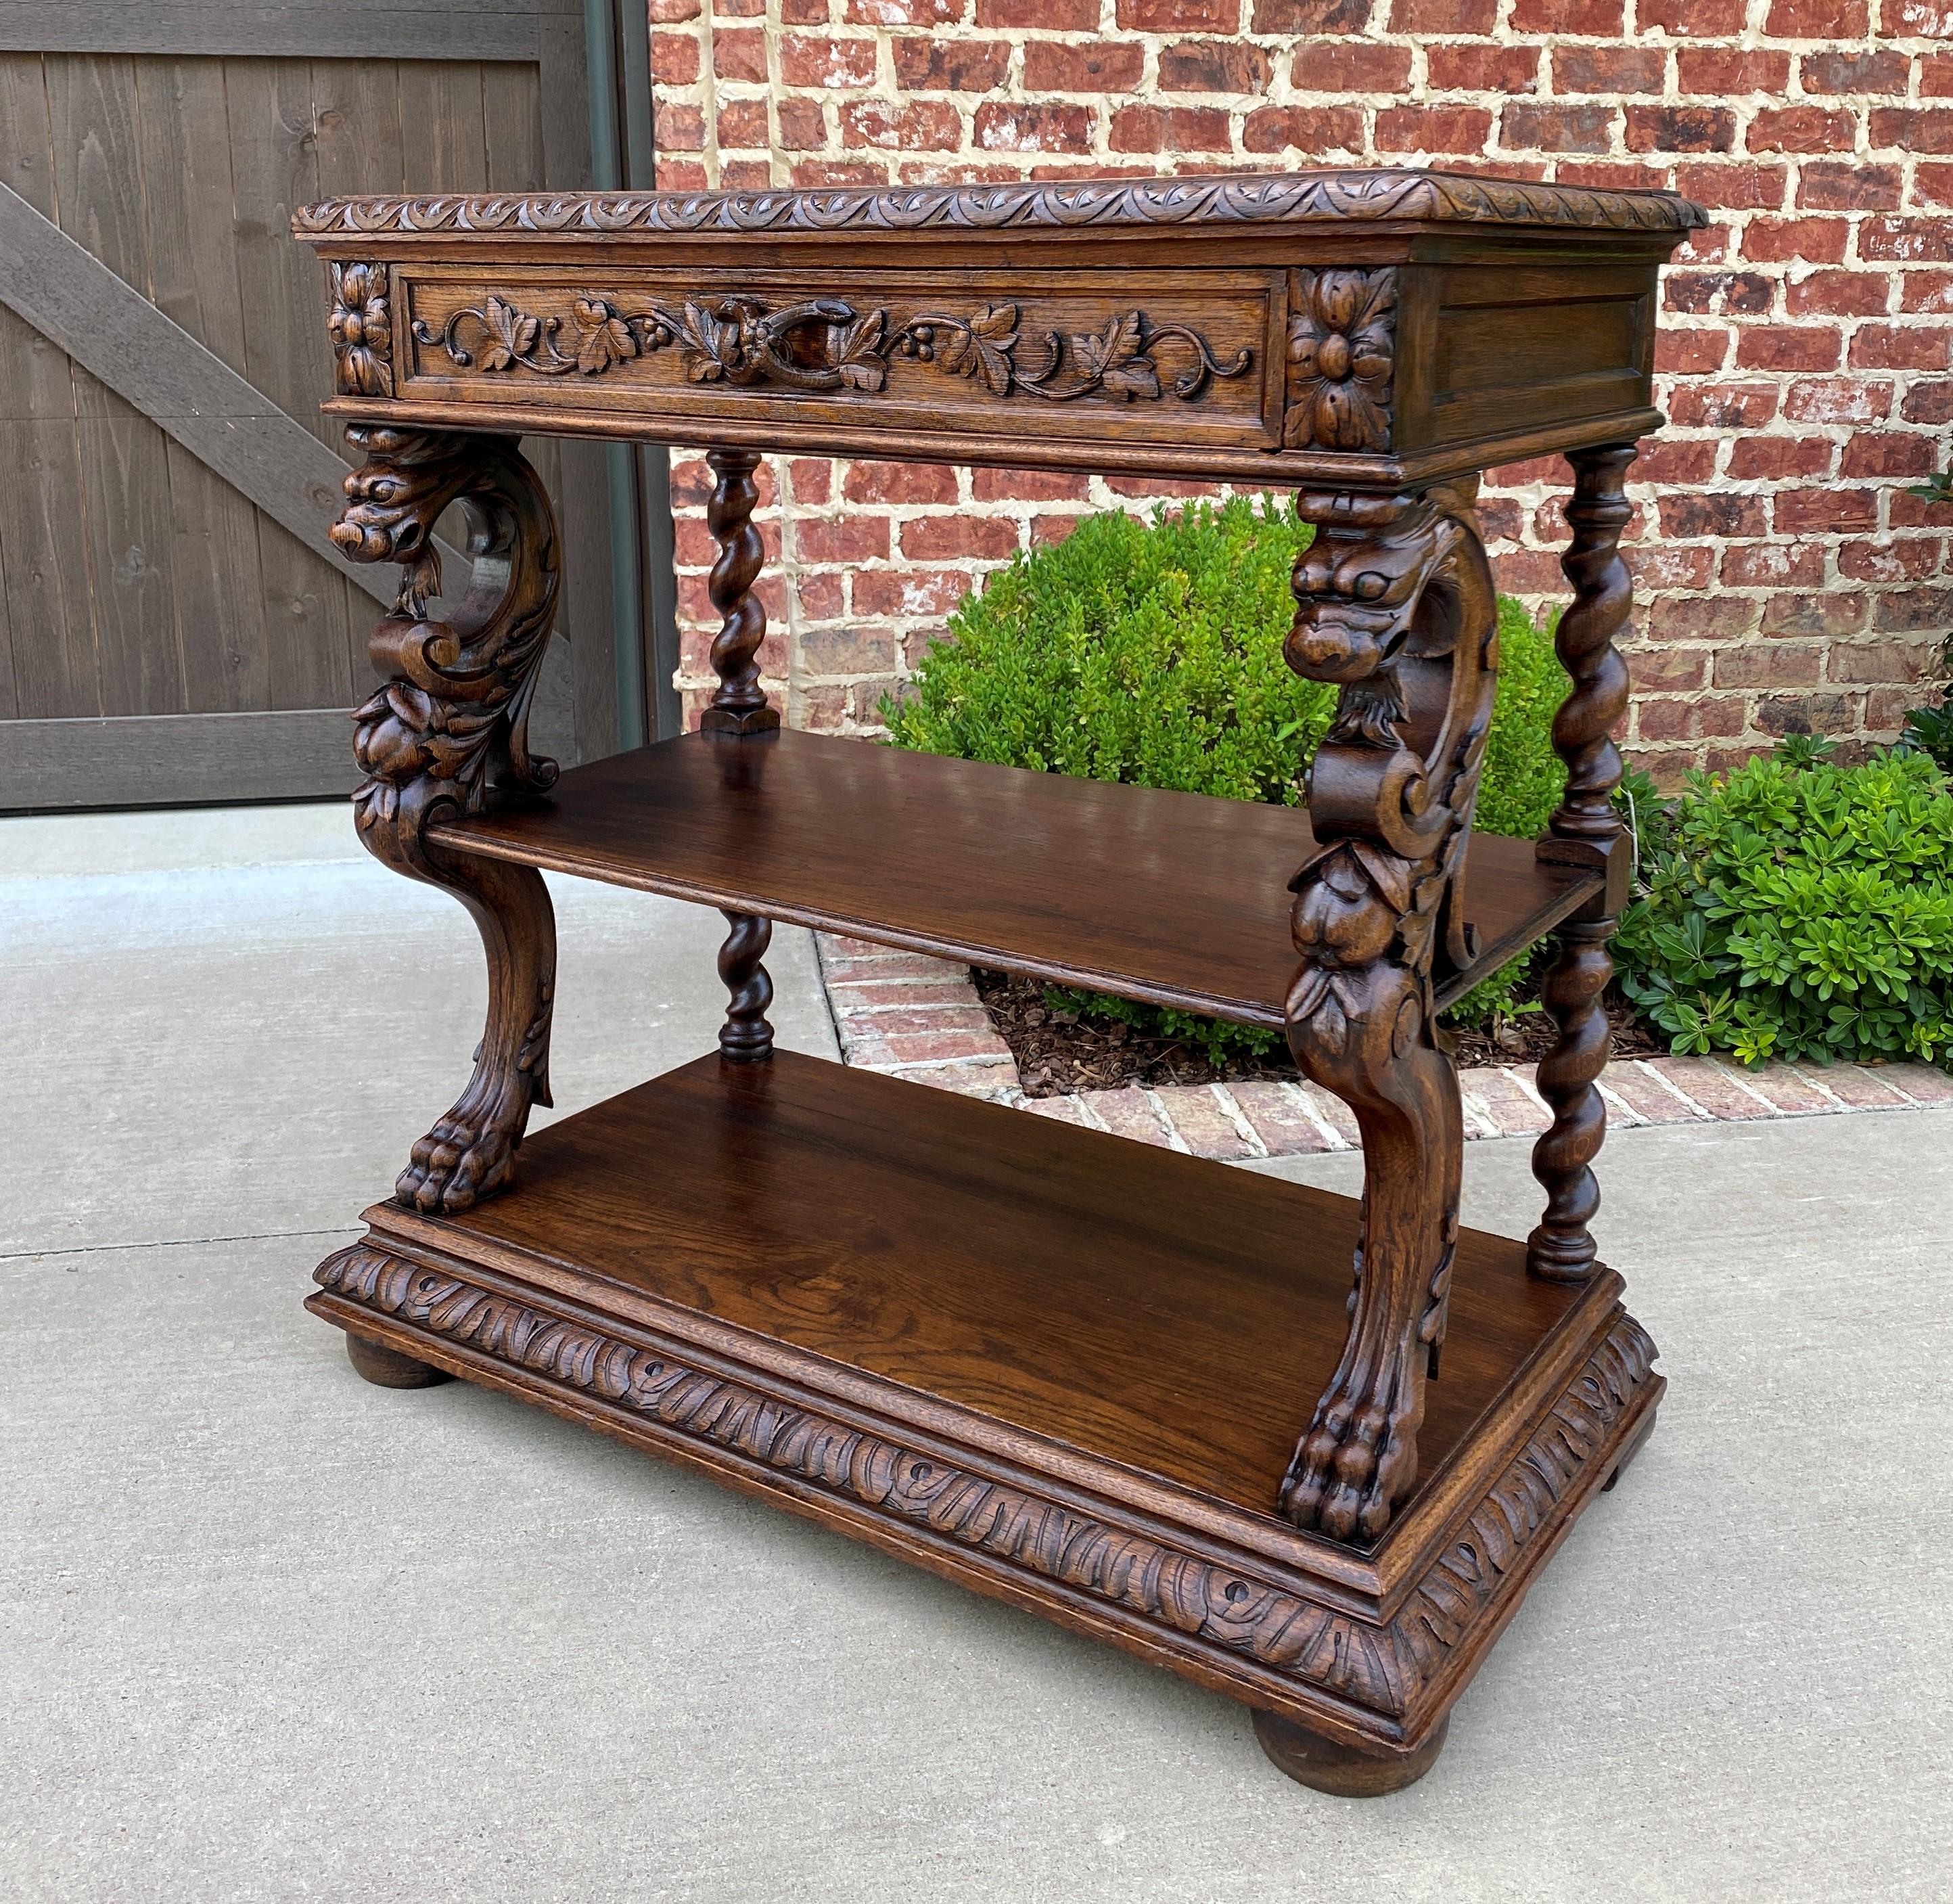 Renaissance Revival Antique French Server Sideboard Buffet 3-Tier Dragons Barley Twist Marble Top